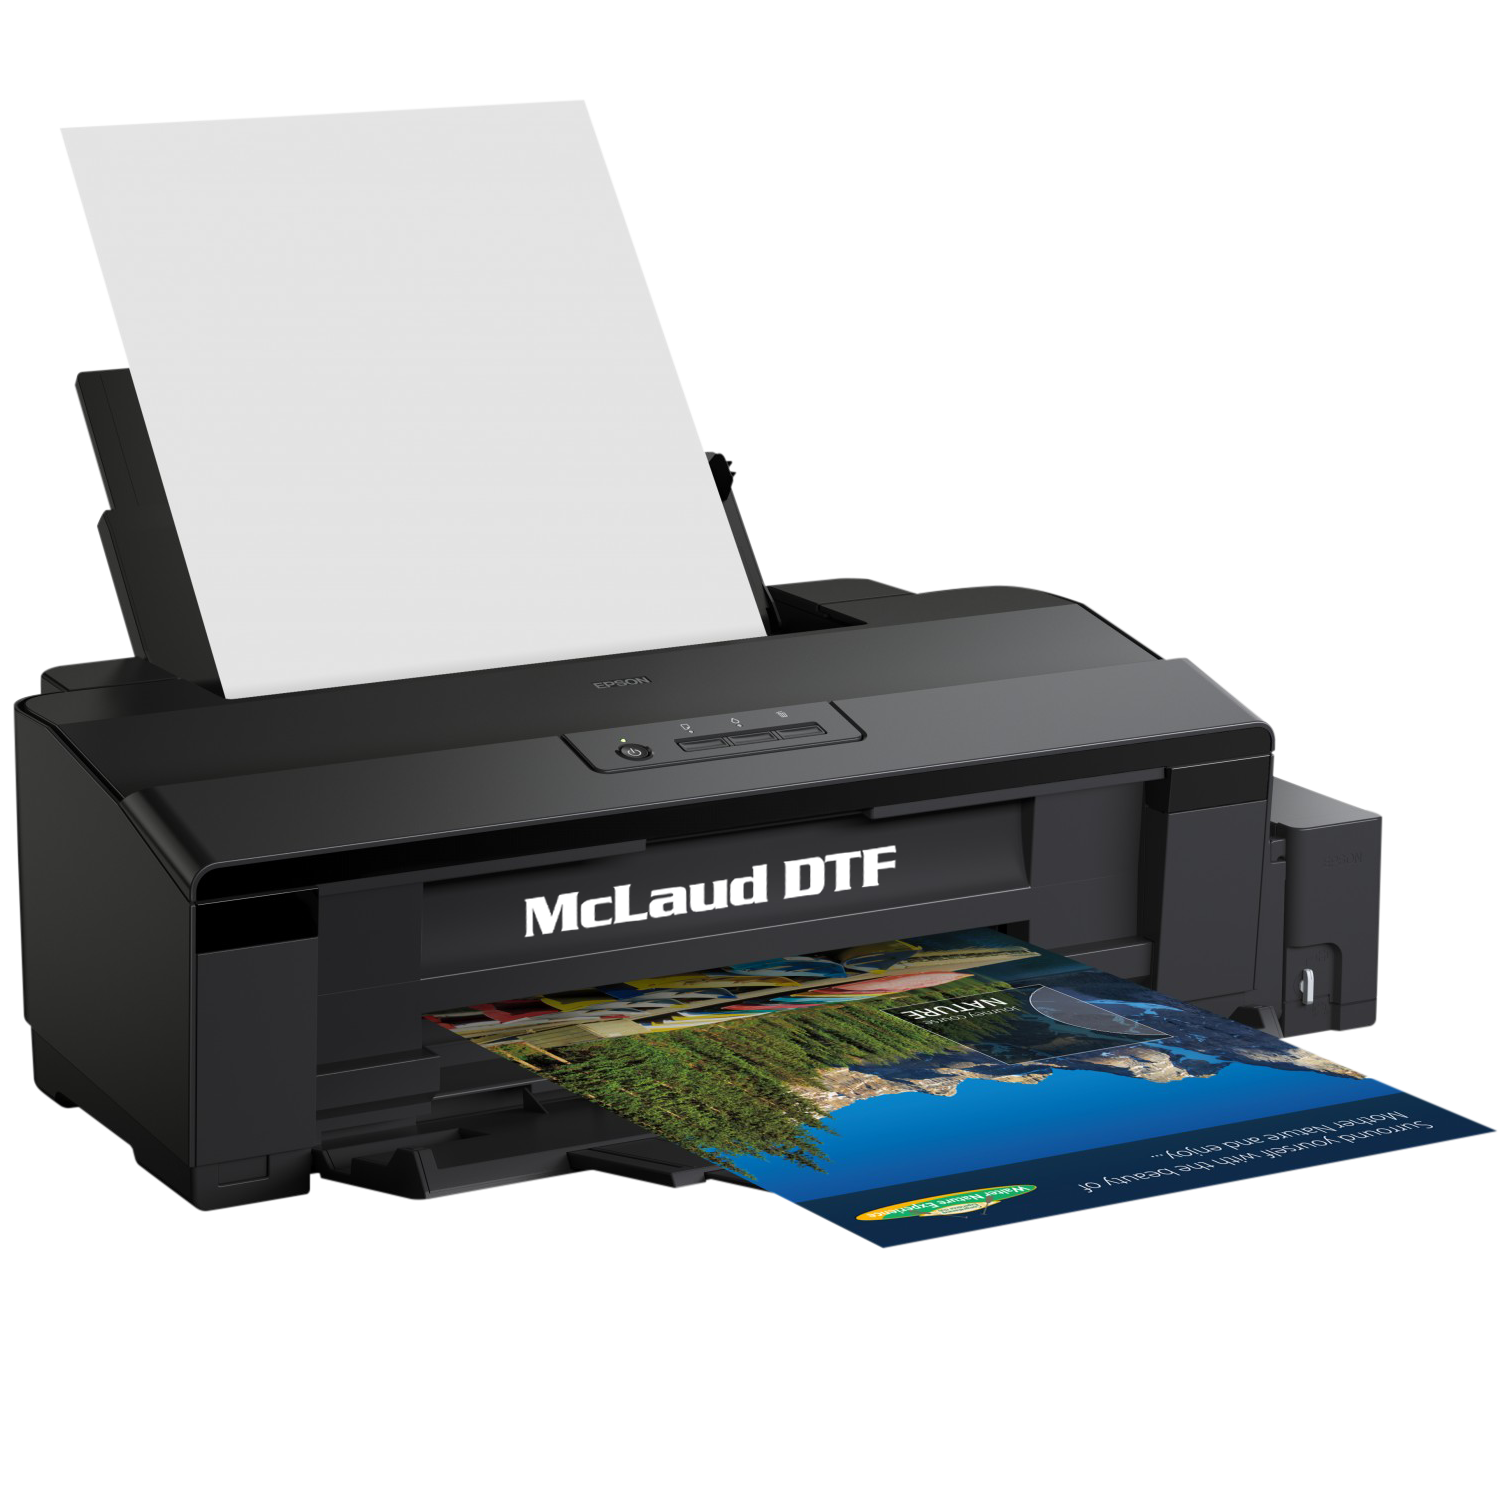 McLaud DTF Film A3 (11.75 x 16.5 inch) – McLaud Technology